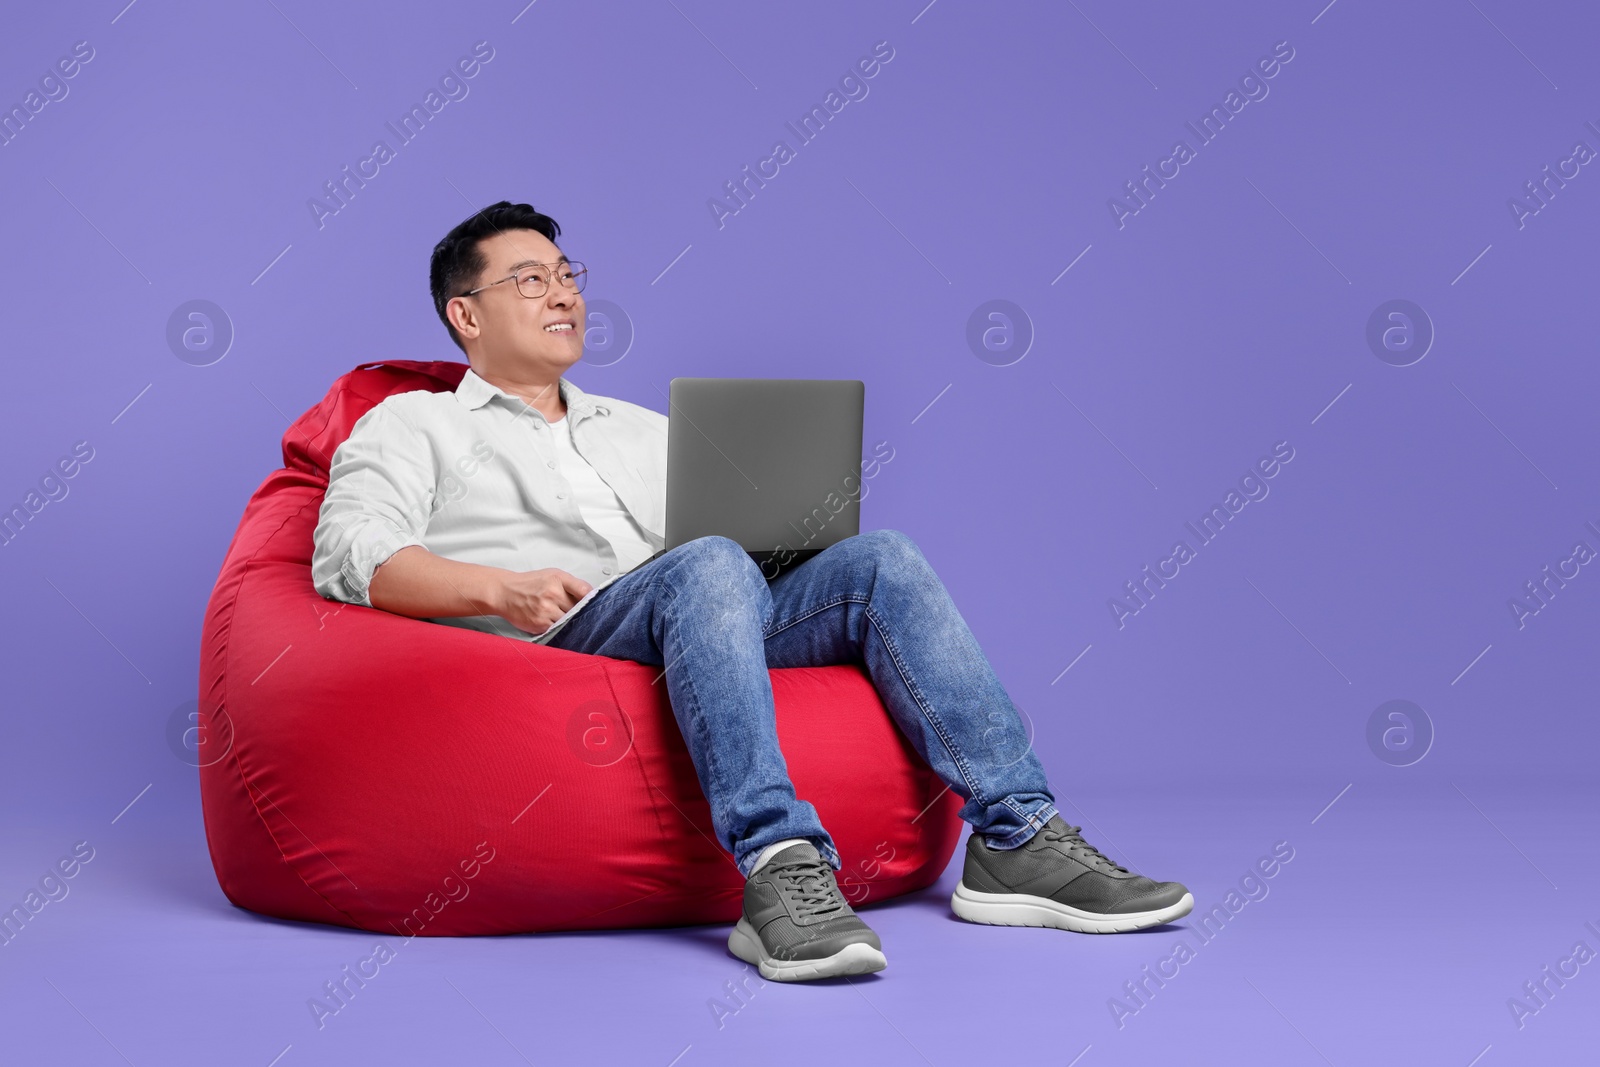 Photo of Smiling man with laptop sitting in beanbag chair against lilac background, space for text